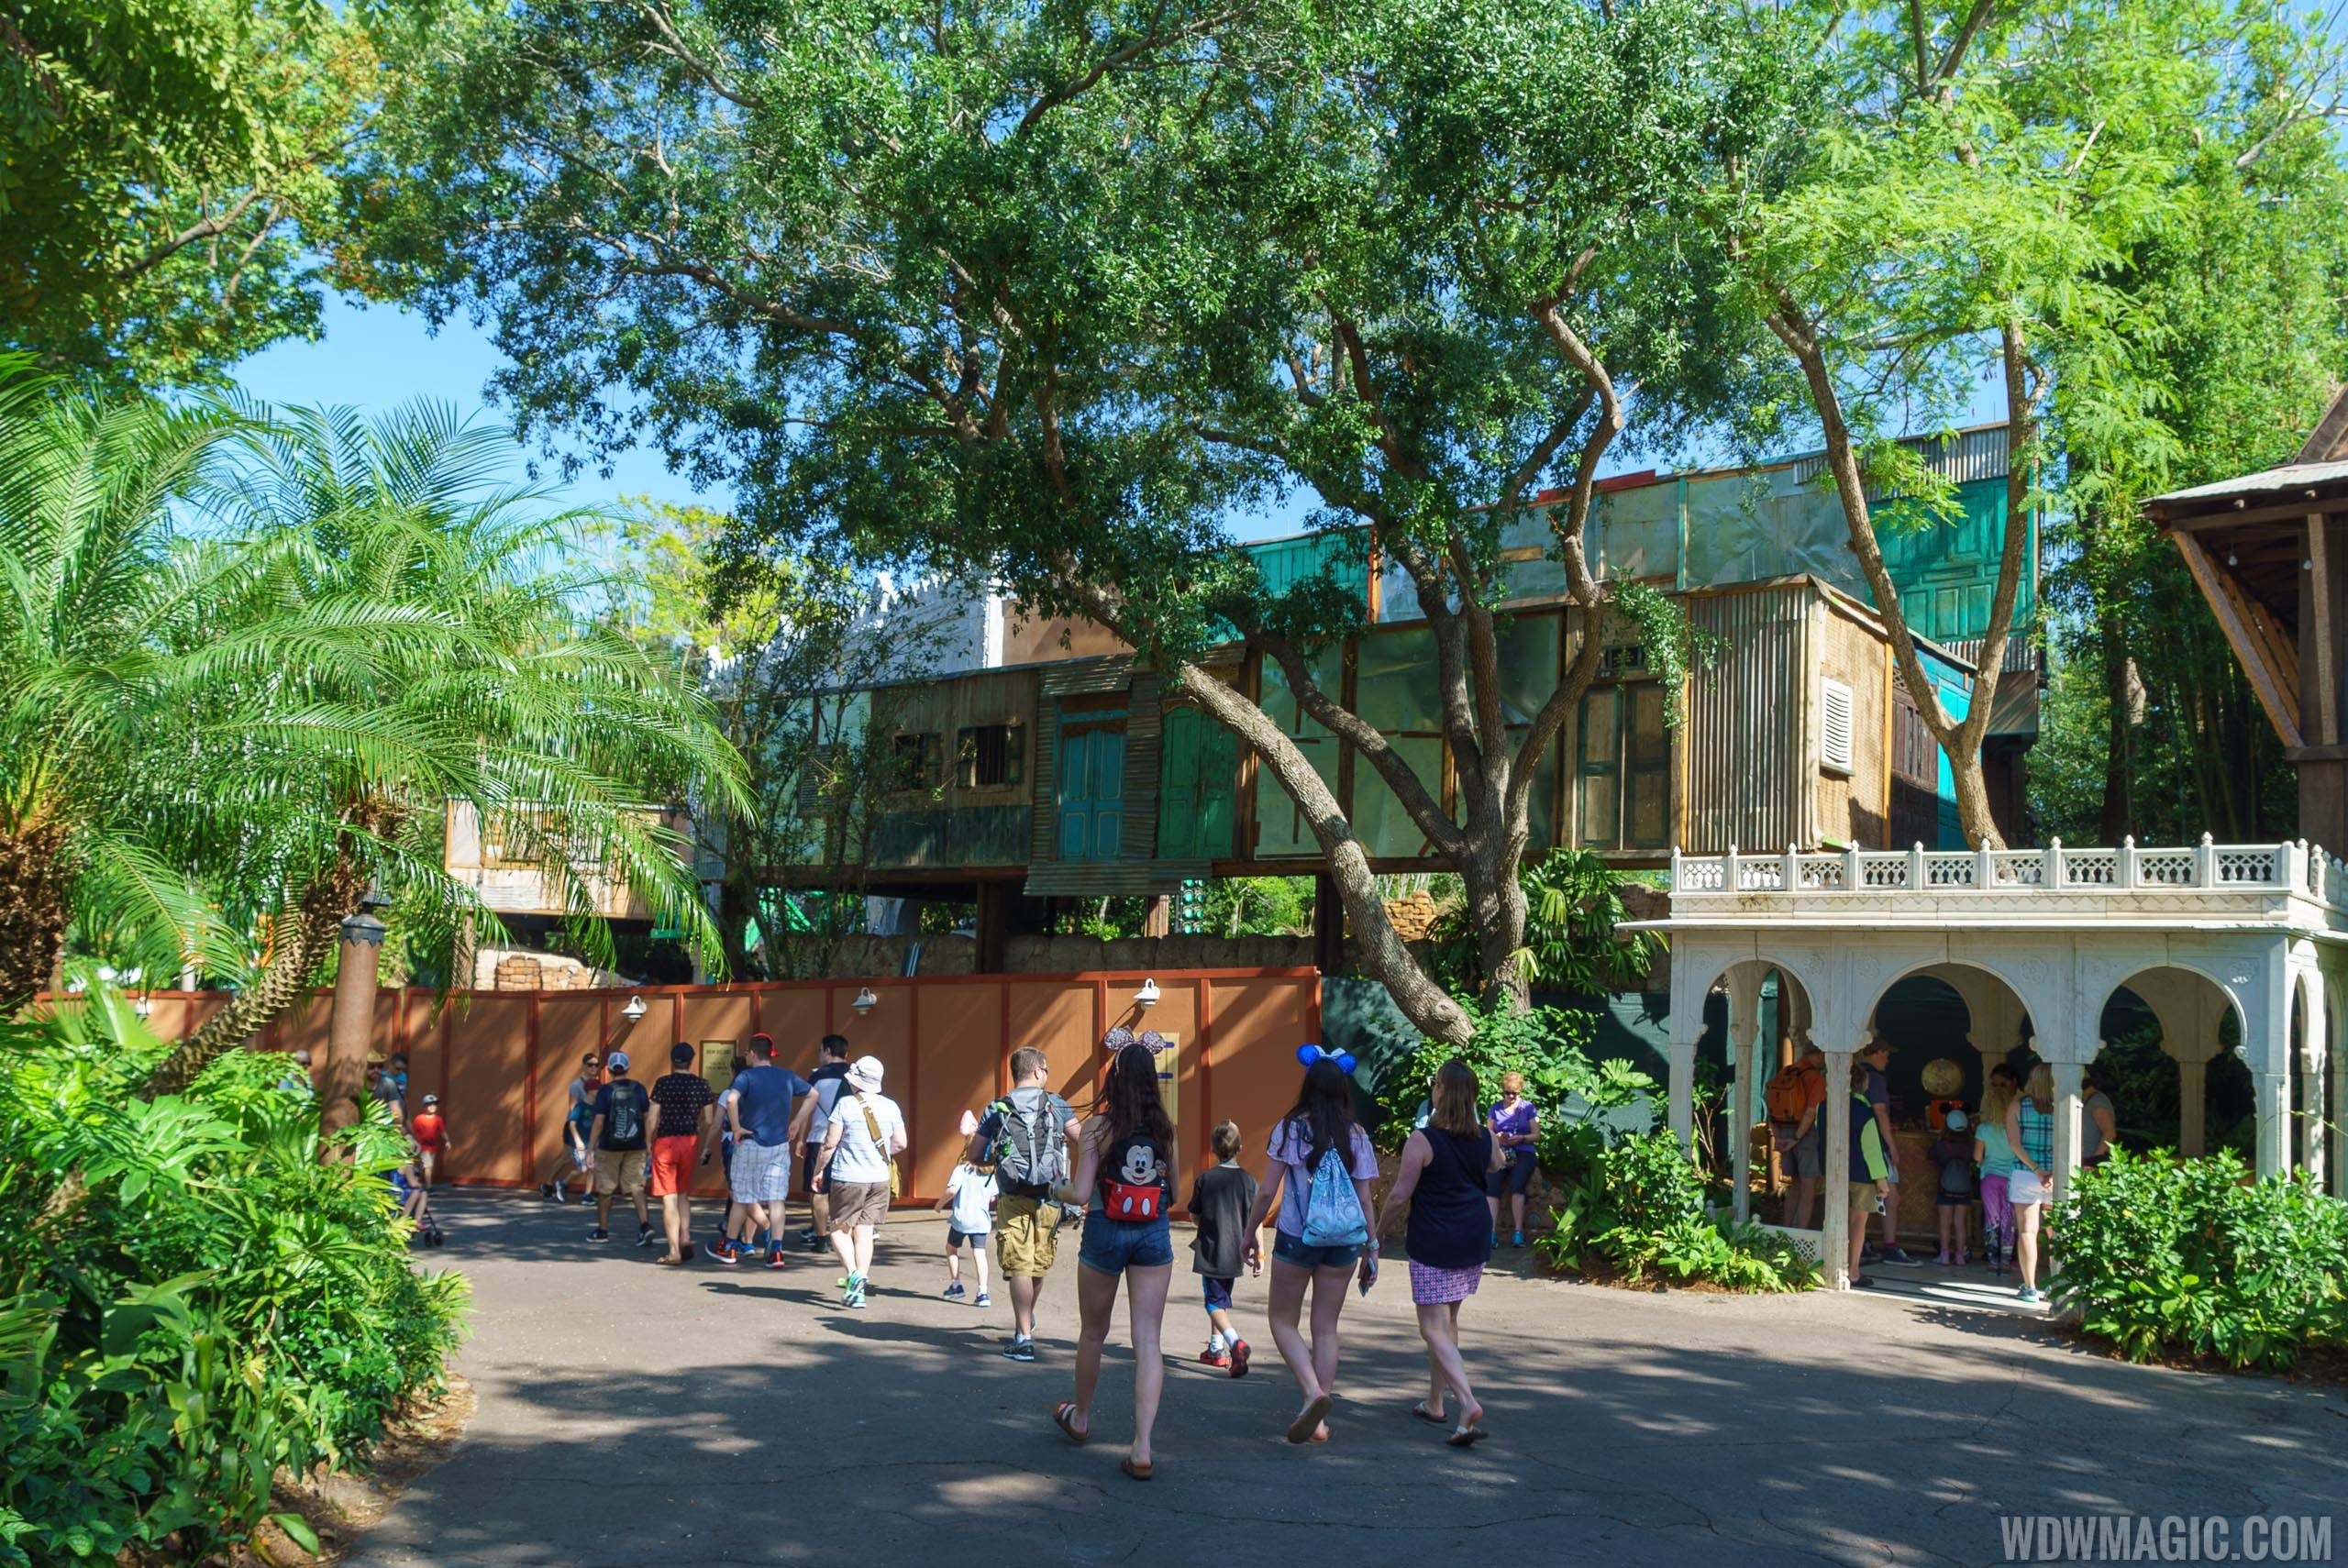 PHOTOS - Work nearing completion on the new look Caravan Stage entrance at Disney's Animal Kingdom